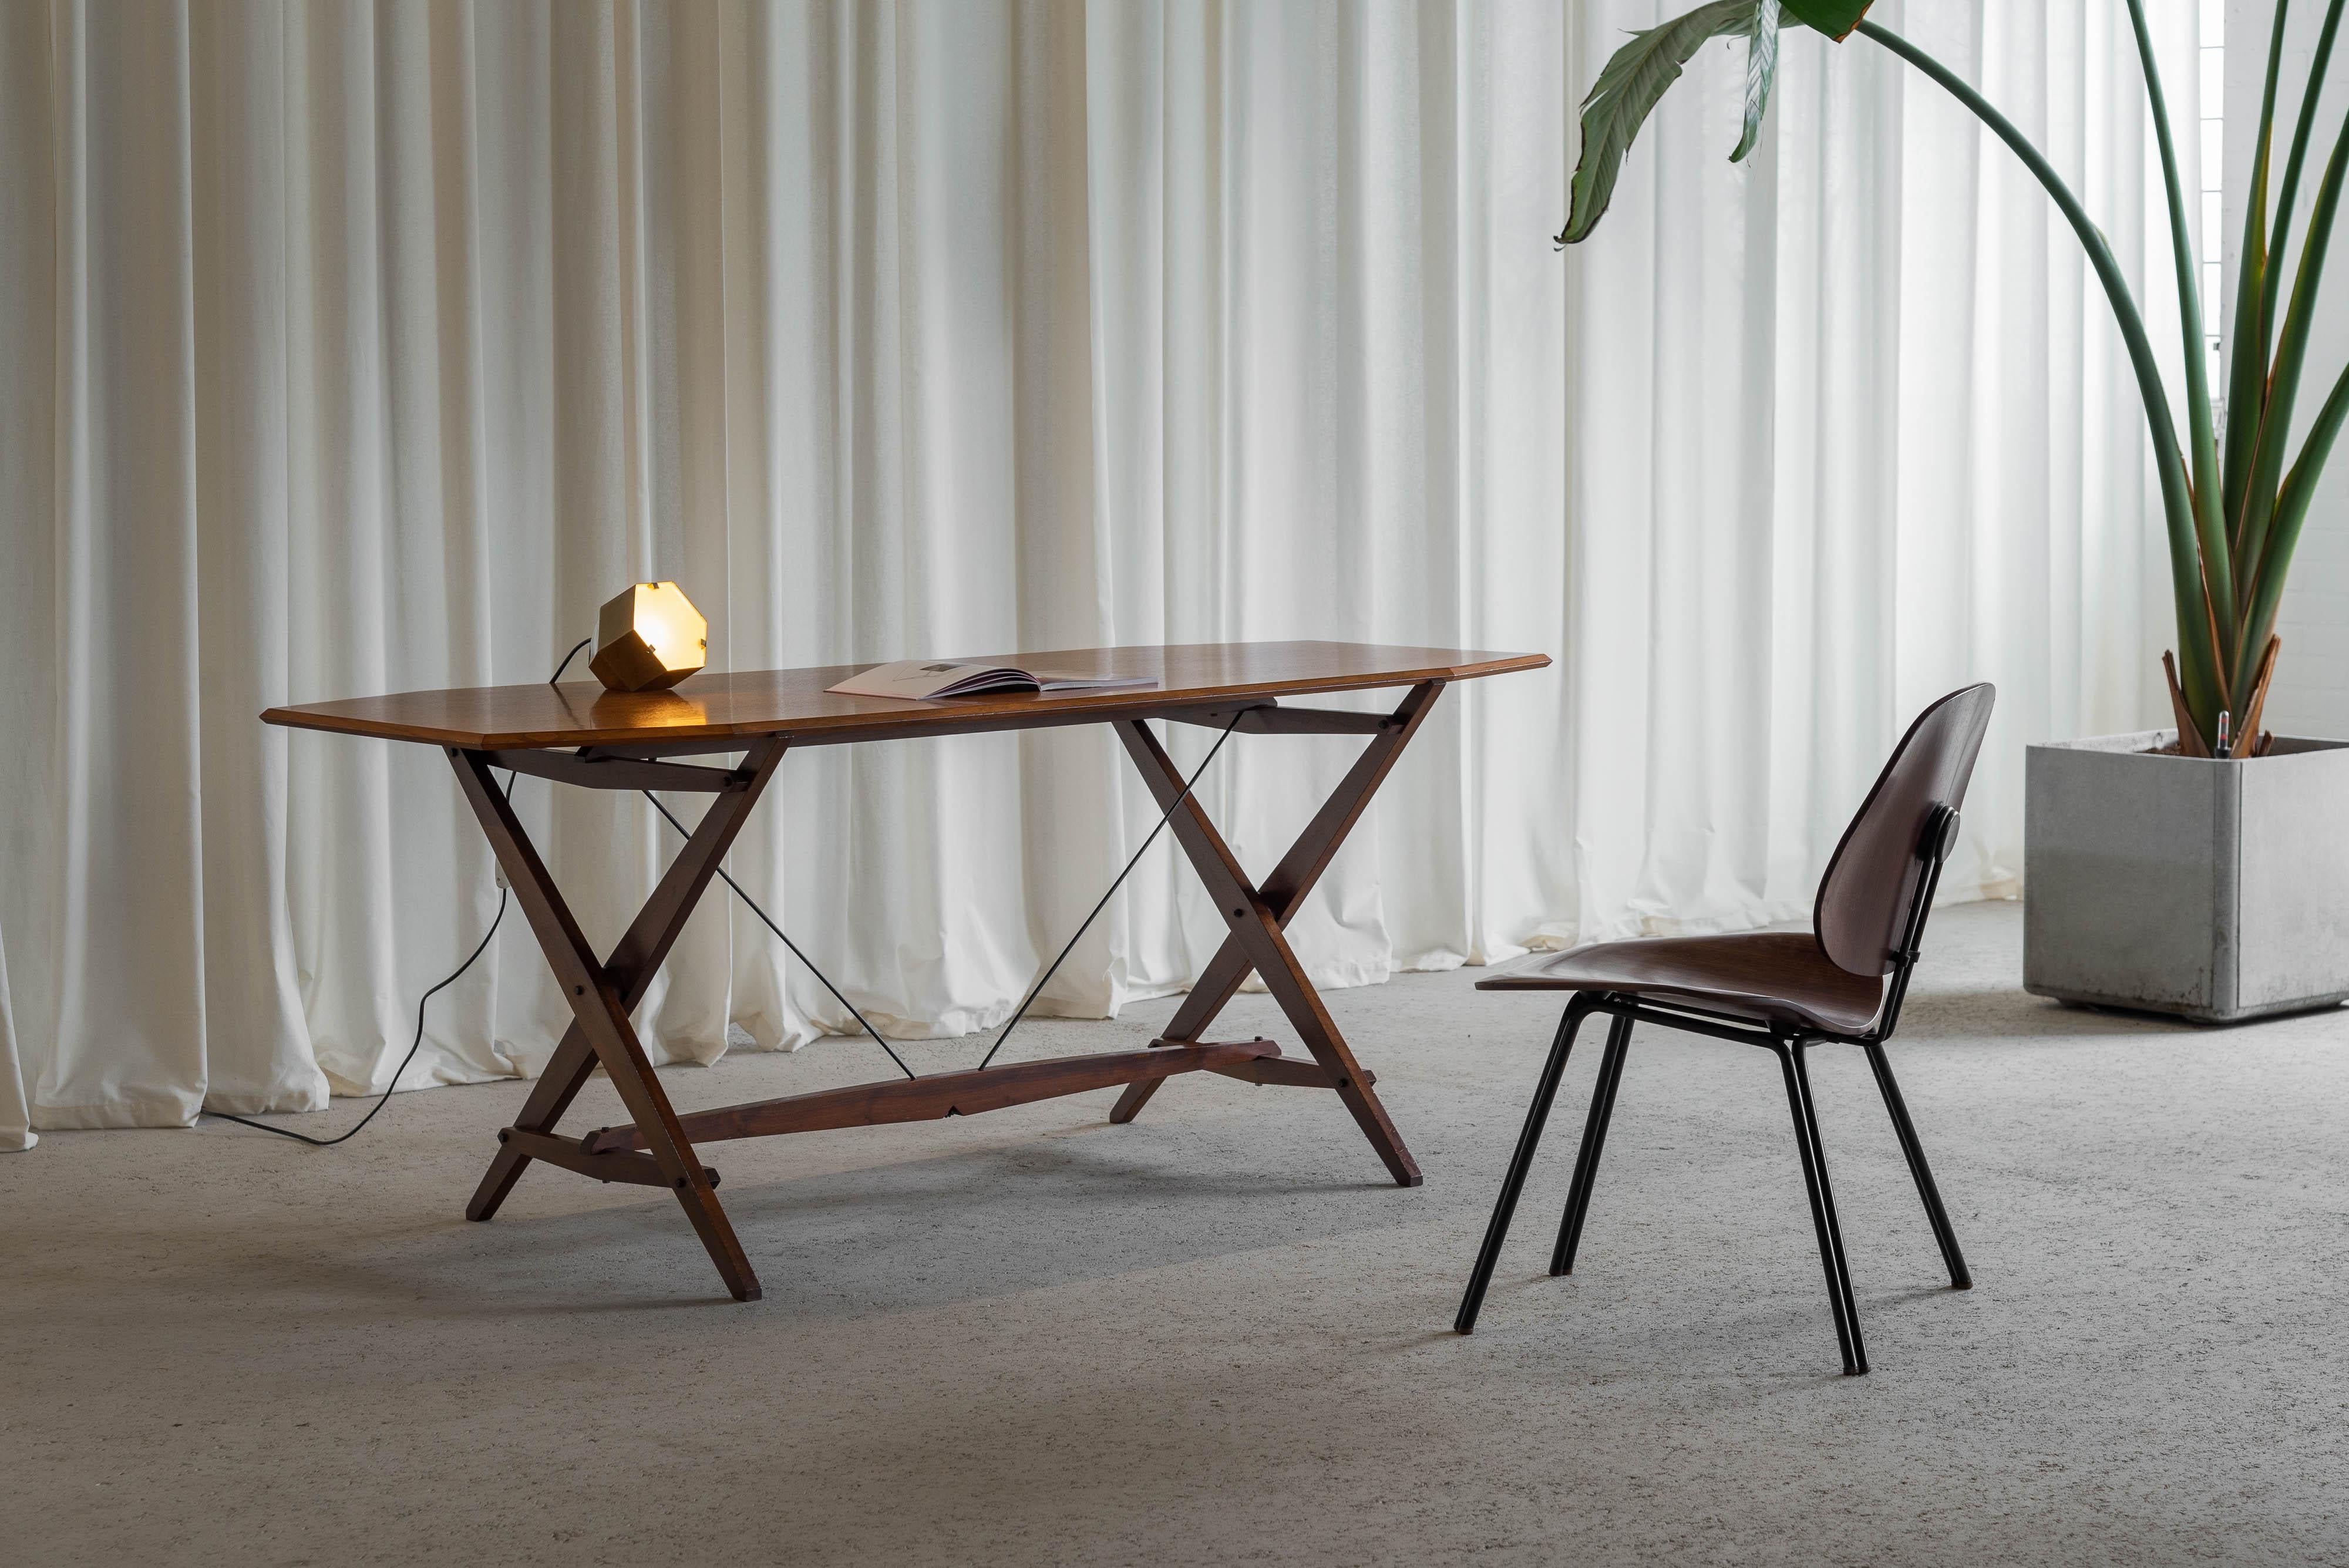 Iconic and early example of the TL2 'Cavalletto' table designed by Franco Albini and manufactured by Poggi in Italy around 1950. The table has an amazing dynamic and archtectural shape with symmetrical angles and a mix of materials making it one of